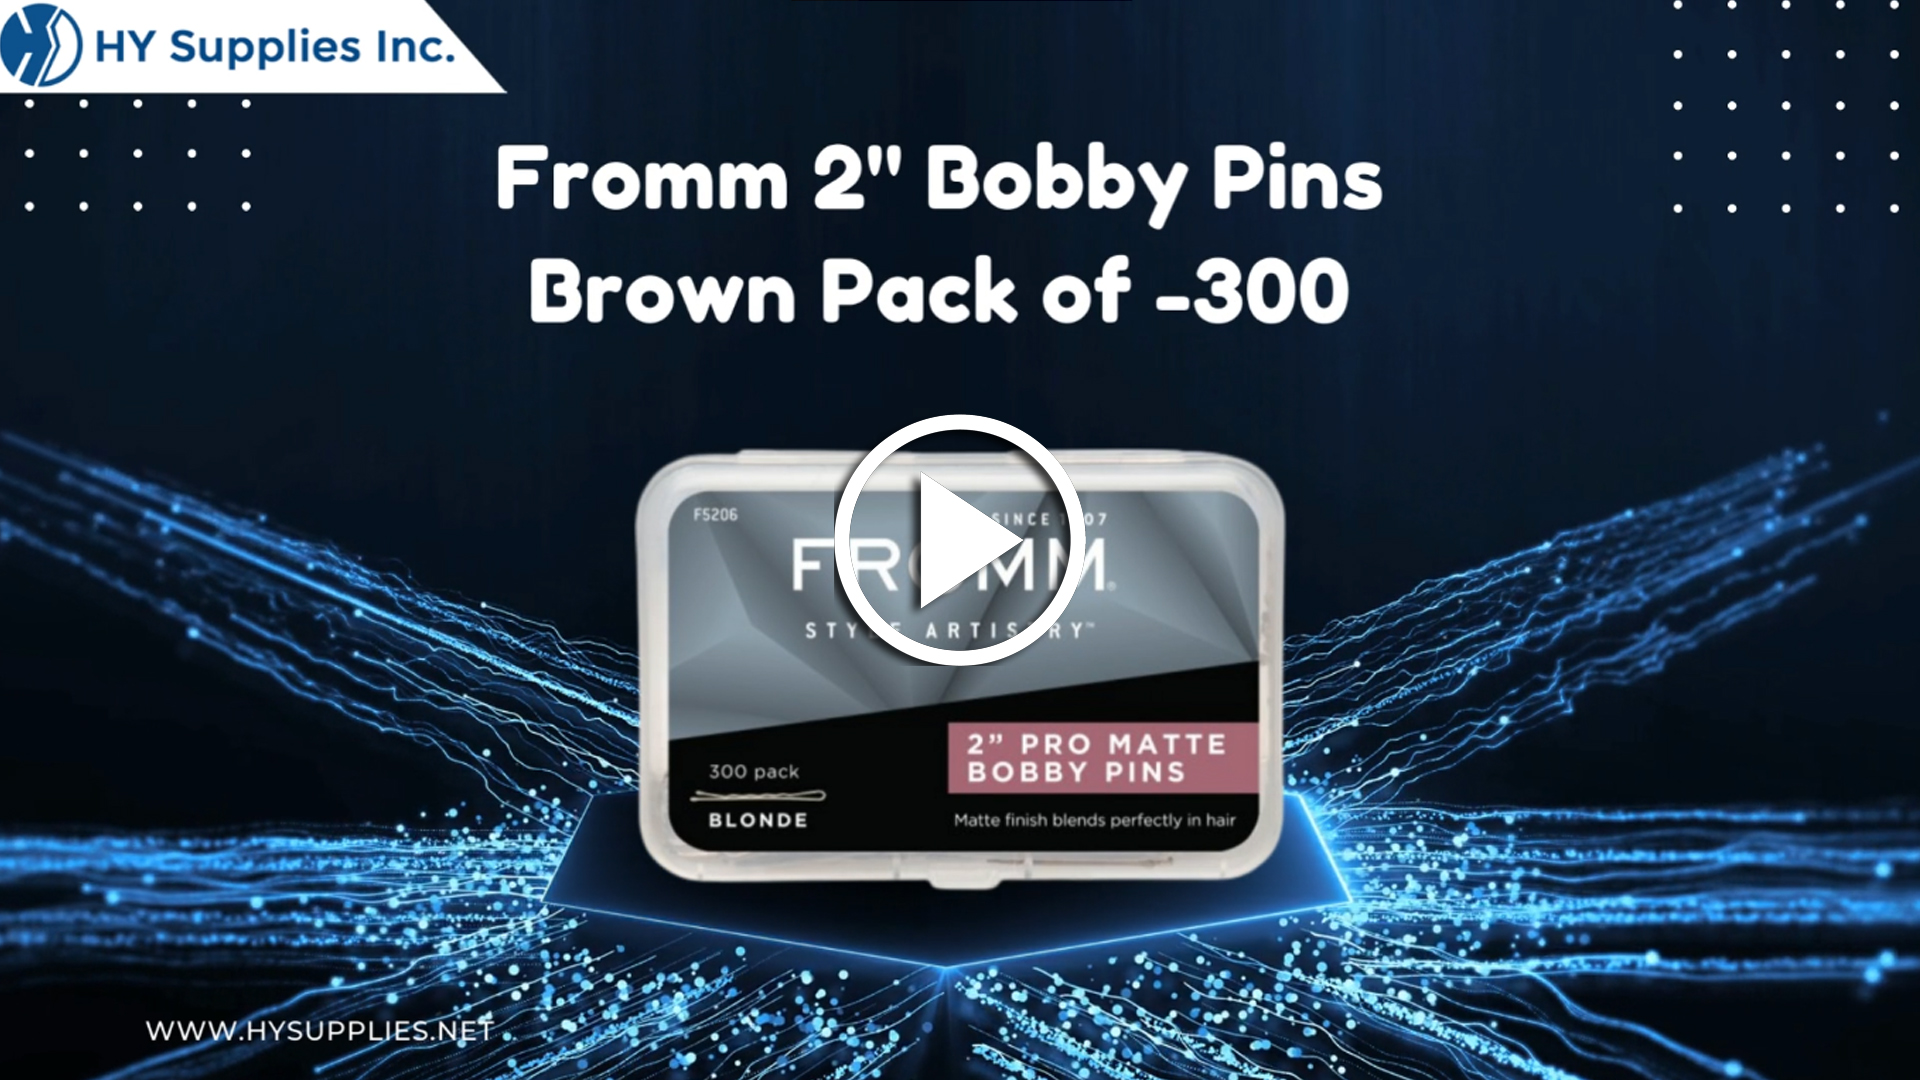 Fromm 2" Bobby Pins Brown Pack of -300